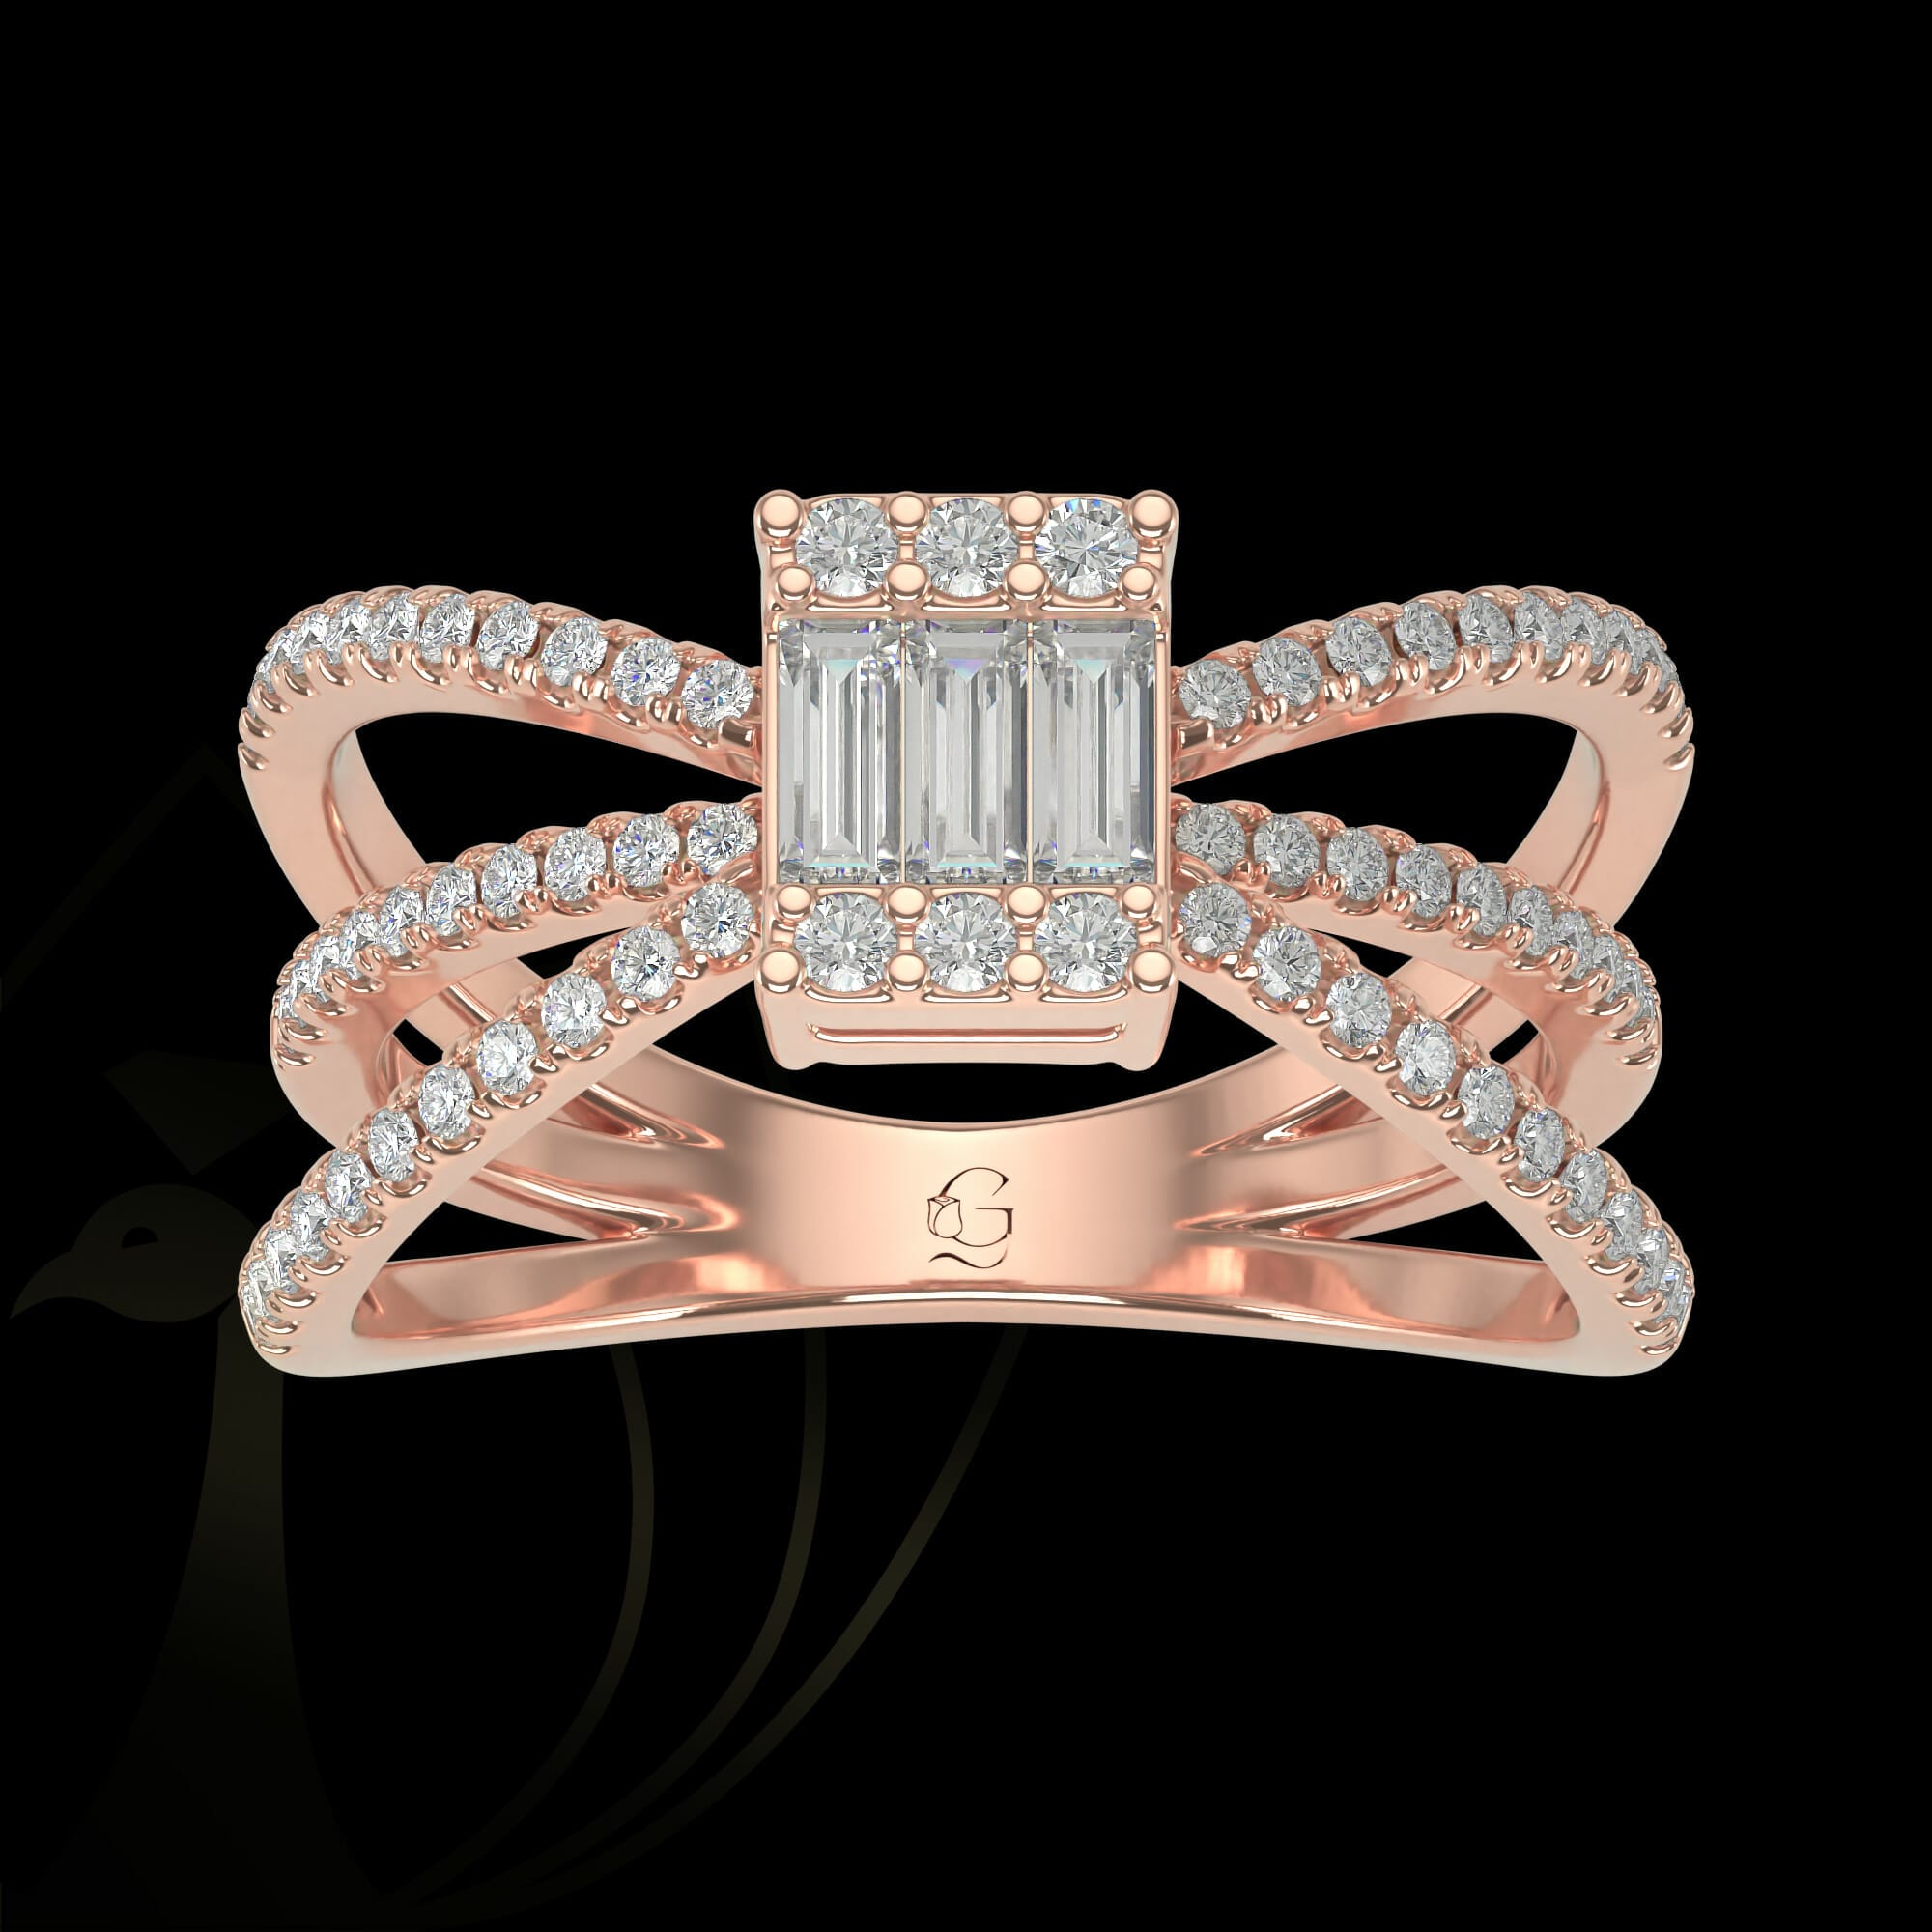 Effervescent Radiance Diamond Ring from our exclusive Gulz Collection